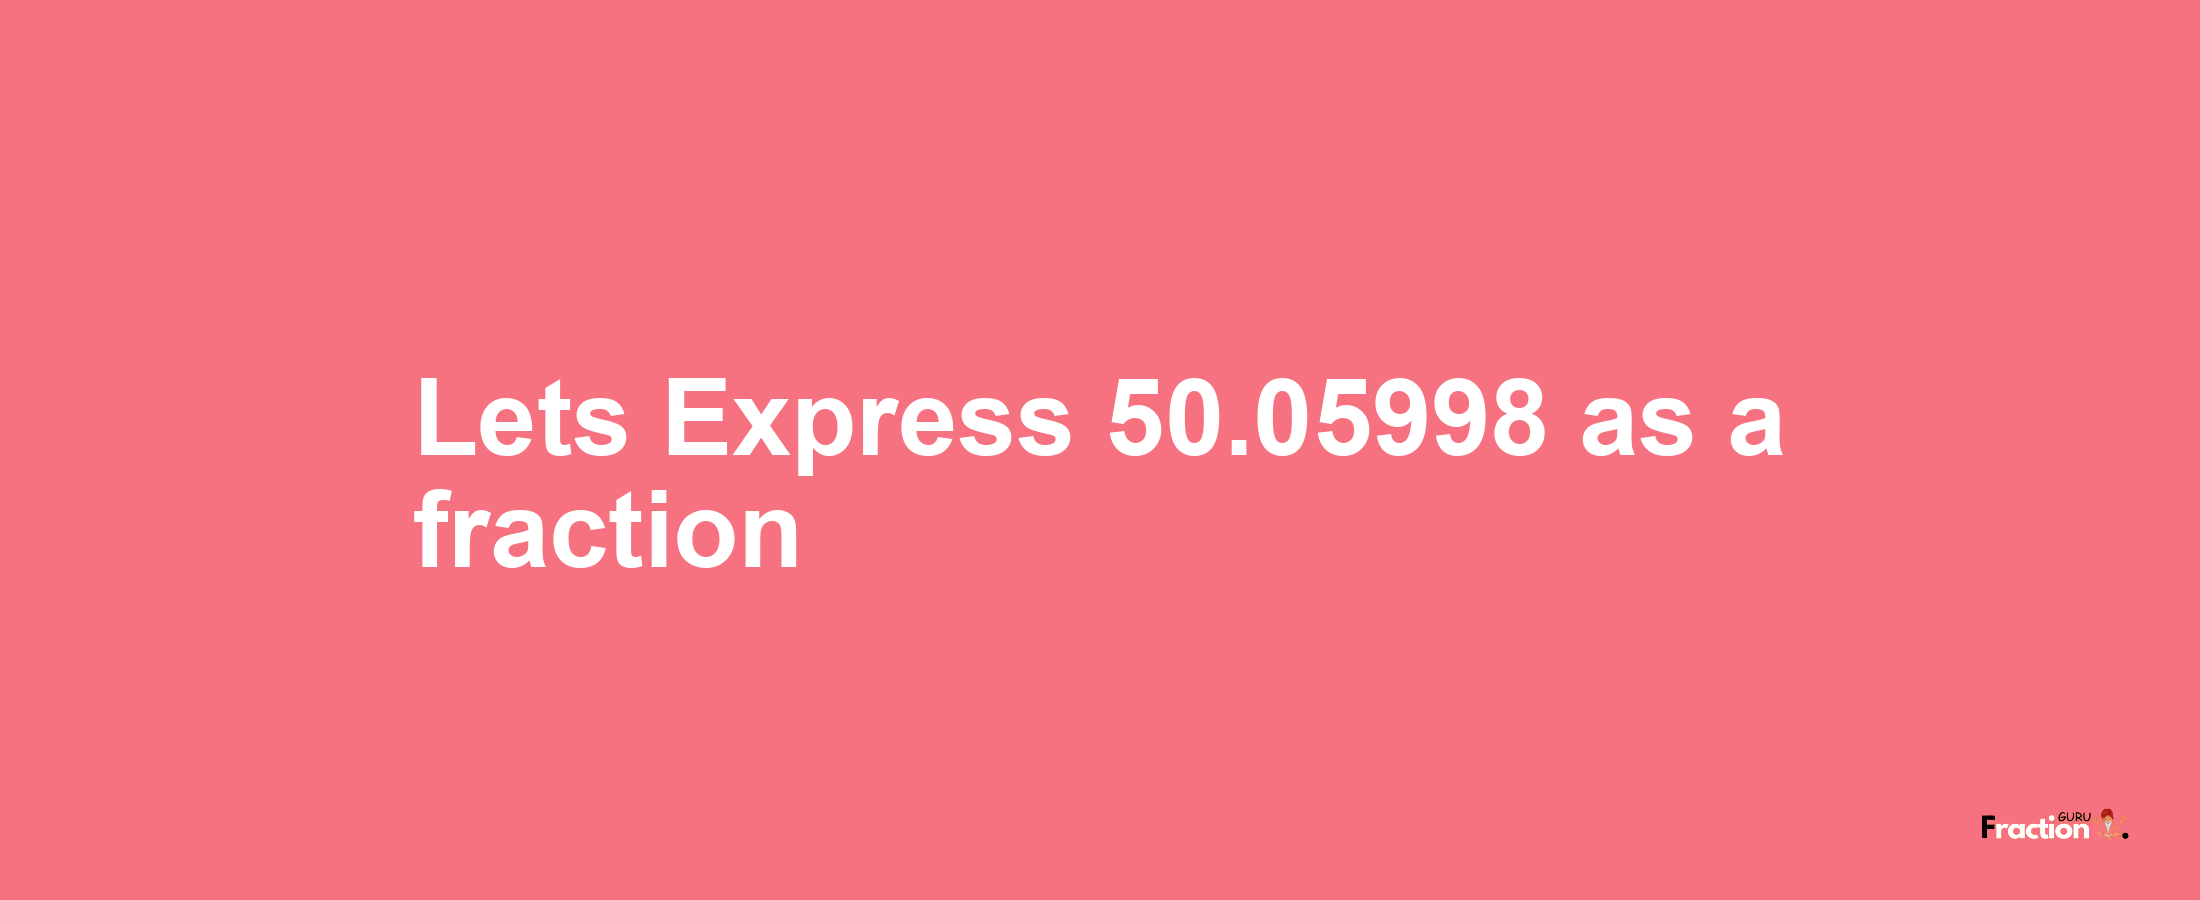 Lets Express 50.05998 as afraction